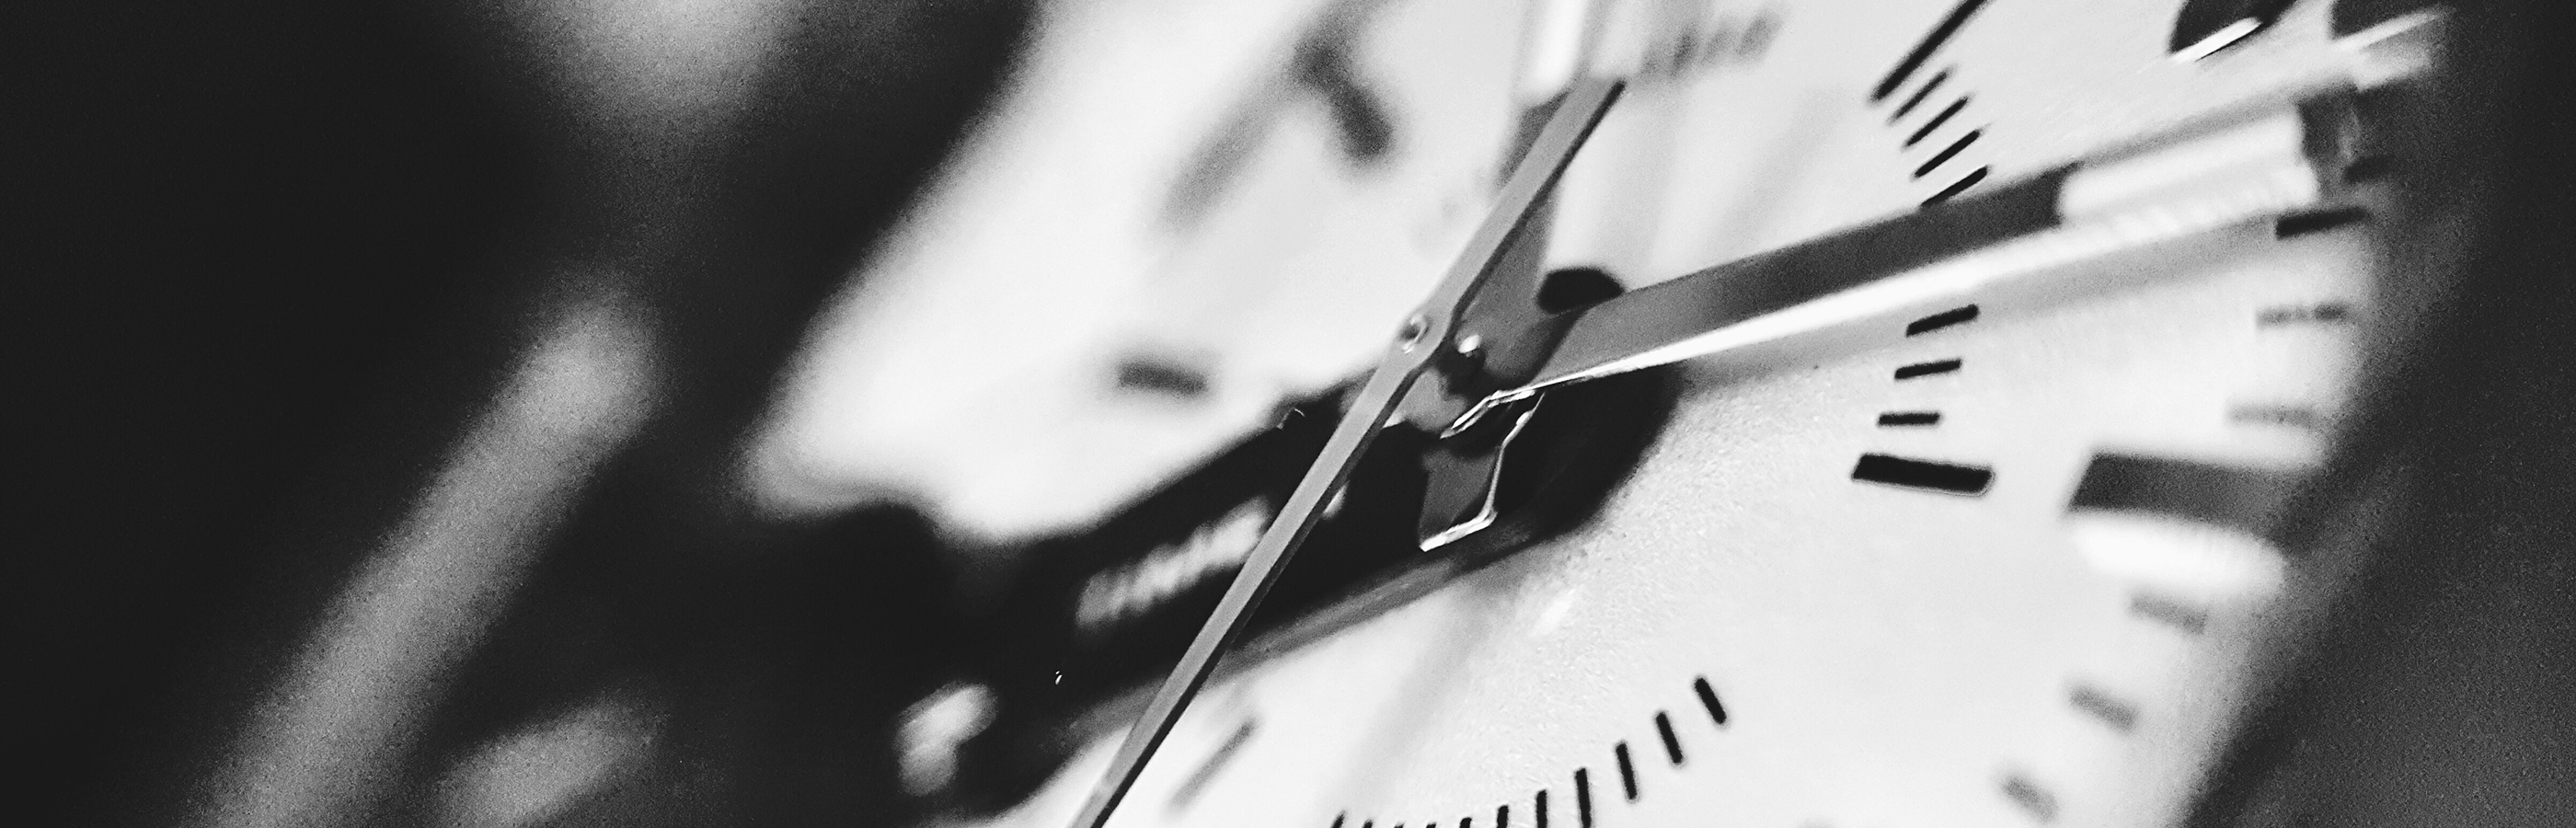 Black and white close up of an analog clock